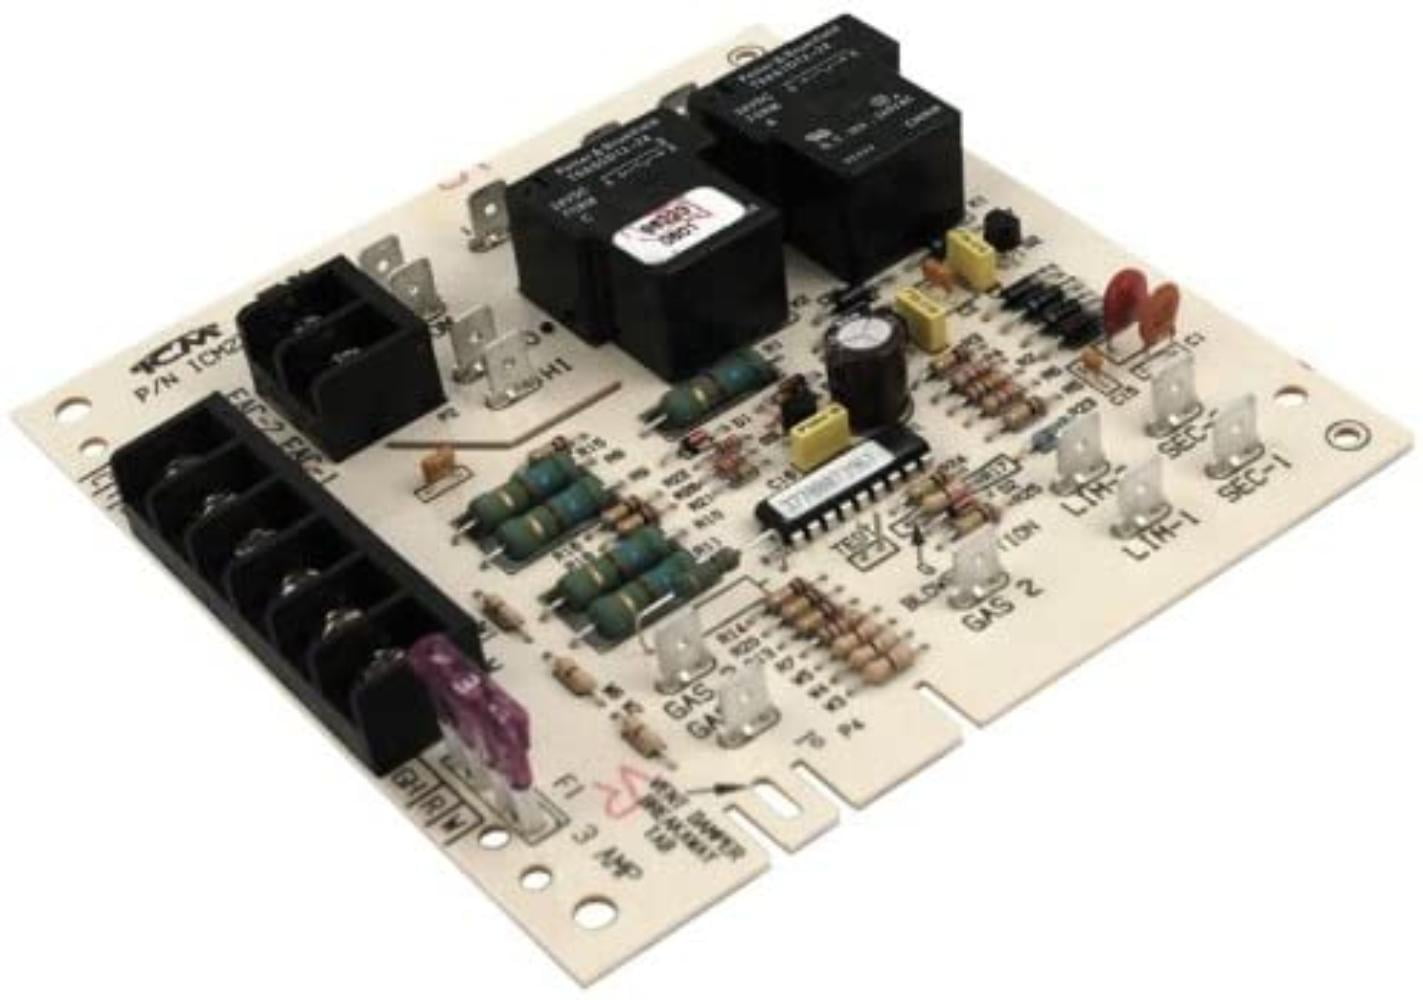 47-102090-02 OEM Upgraded Replacement for Rheem Furnace Control Board